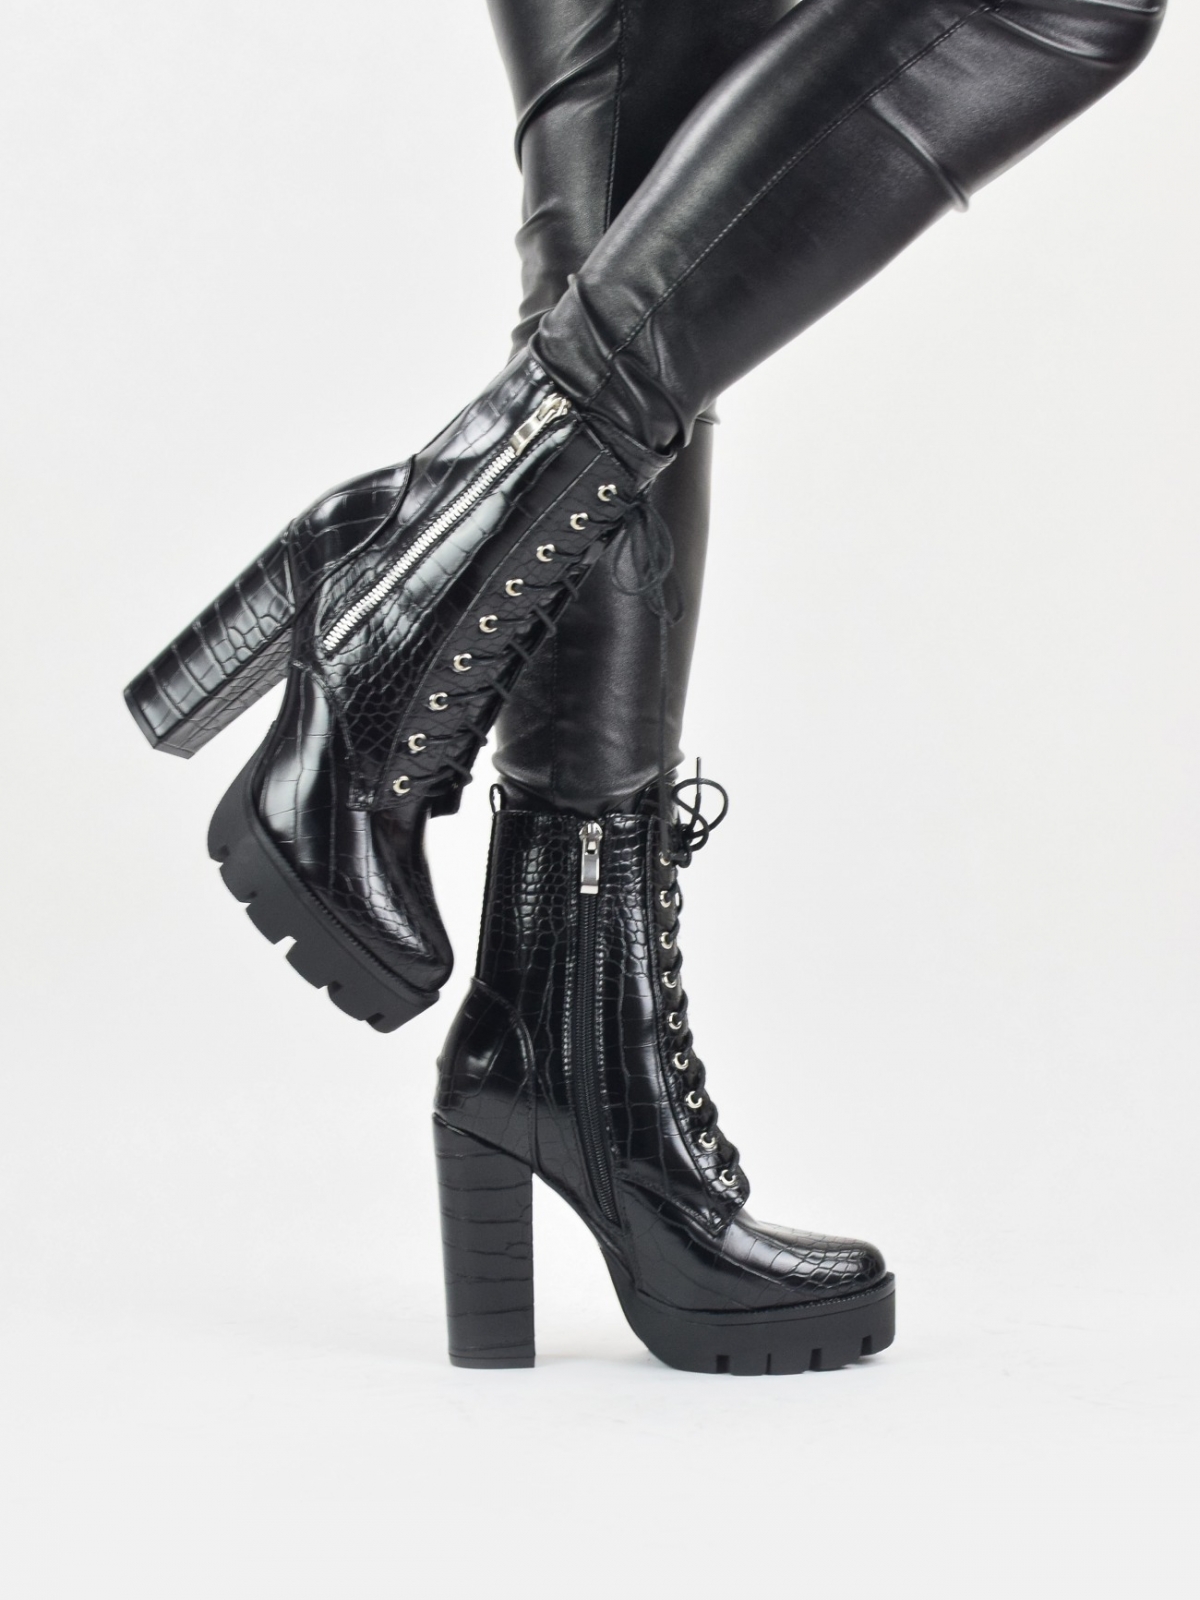 High heeled lace up platform boots with outside zip detail in black snake patent